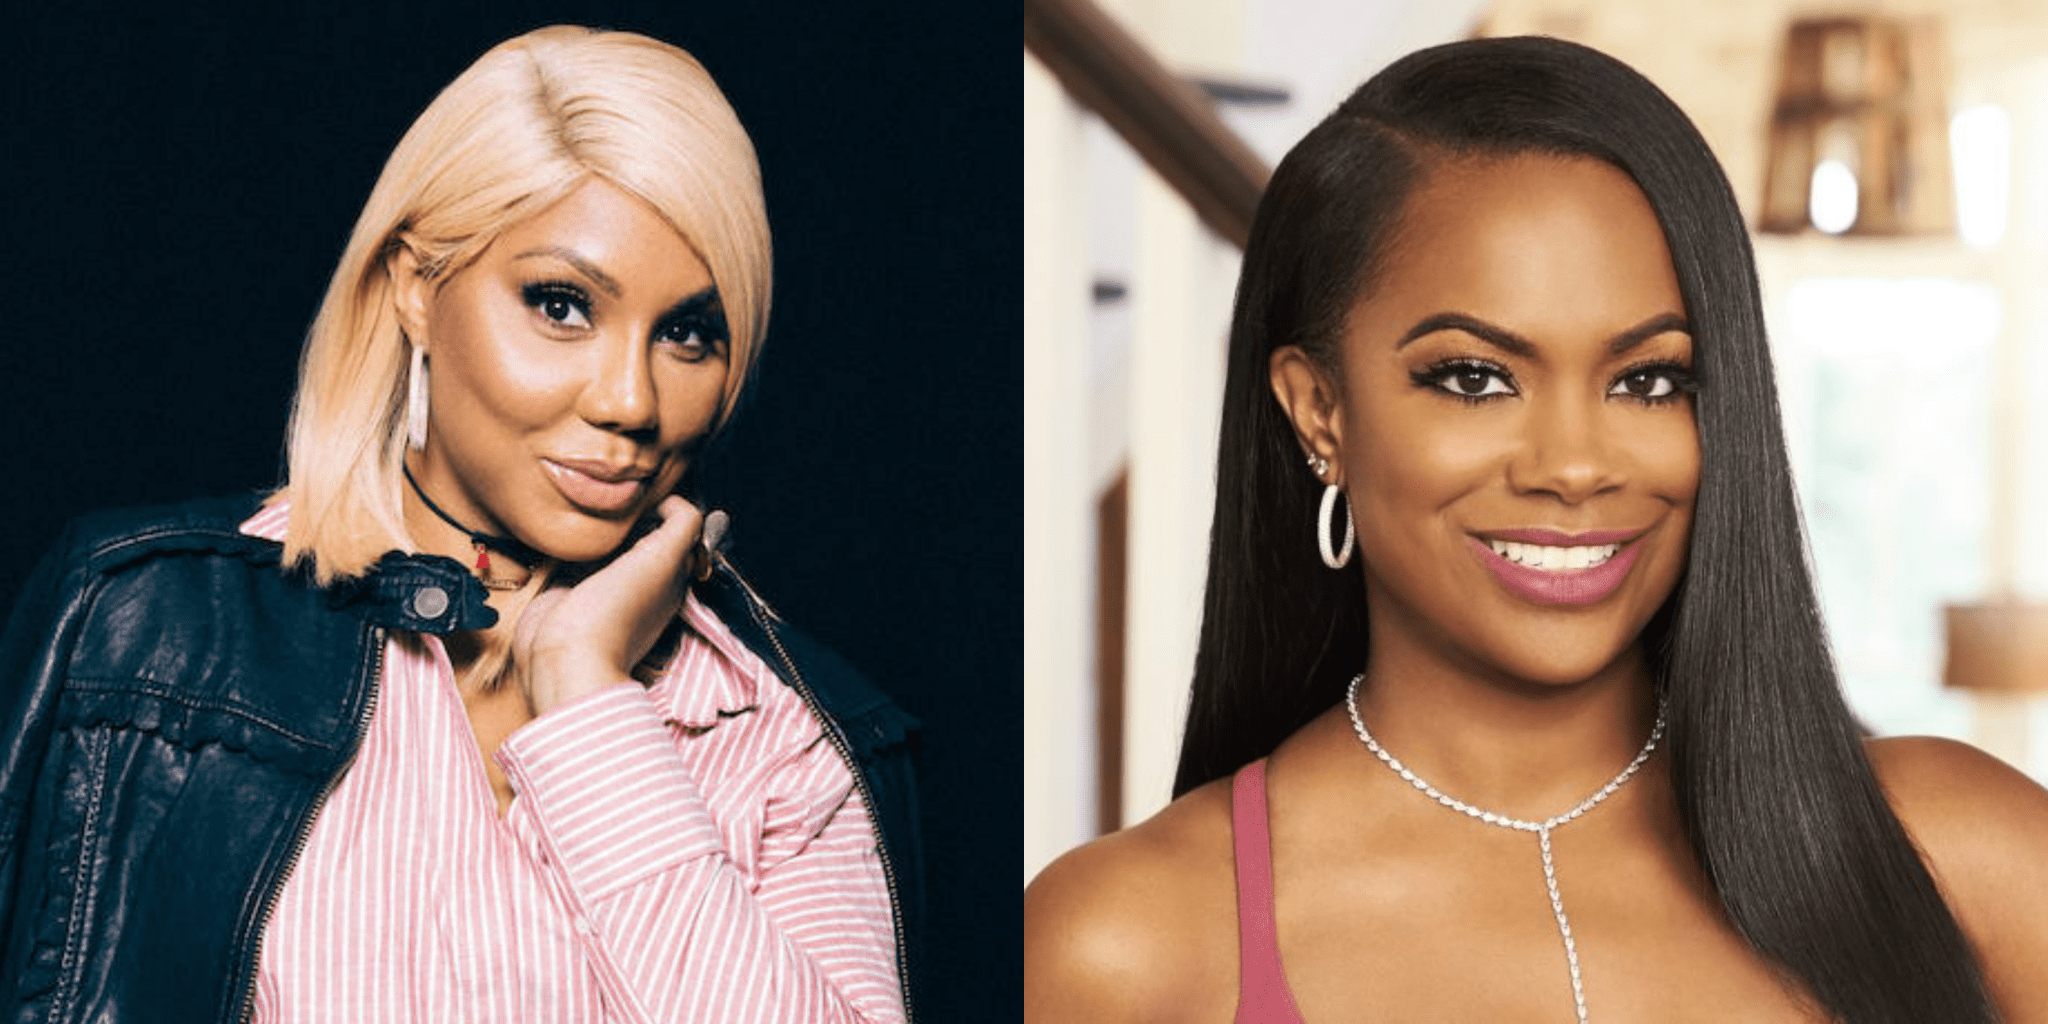 Kandi Burruss And Tamar Braxton Have A Spicy Conversation On Being Relevant - Check Out The Video